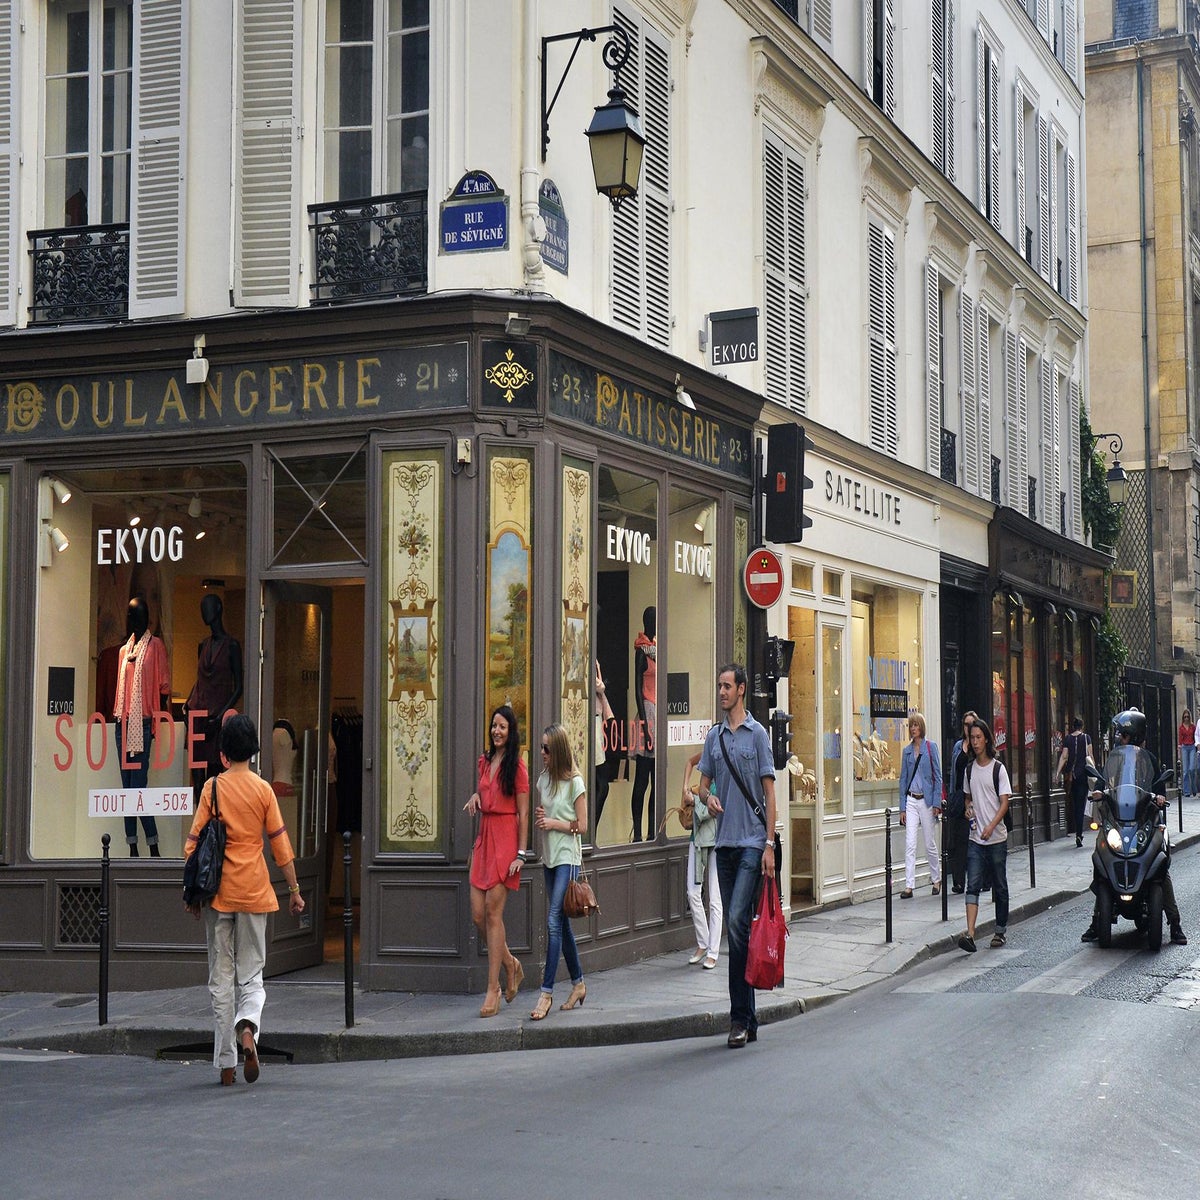 Paris epicerie - a local grocery store in the Marais district of